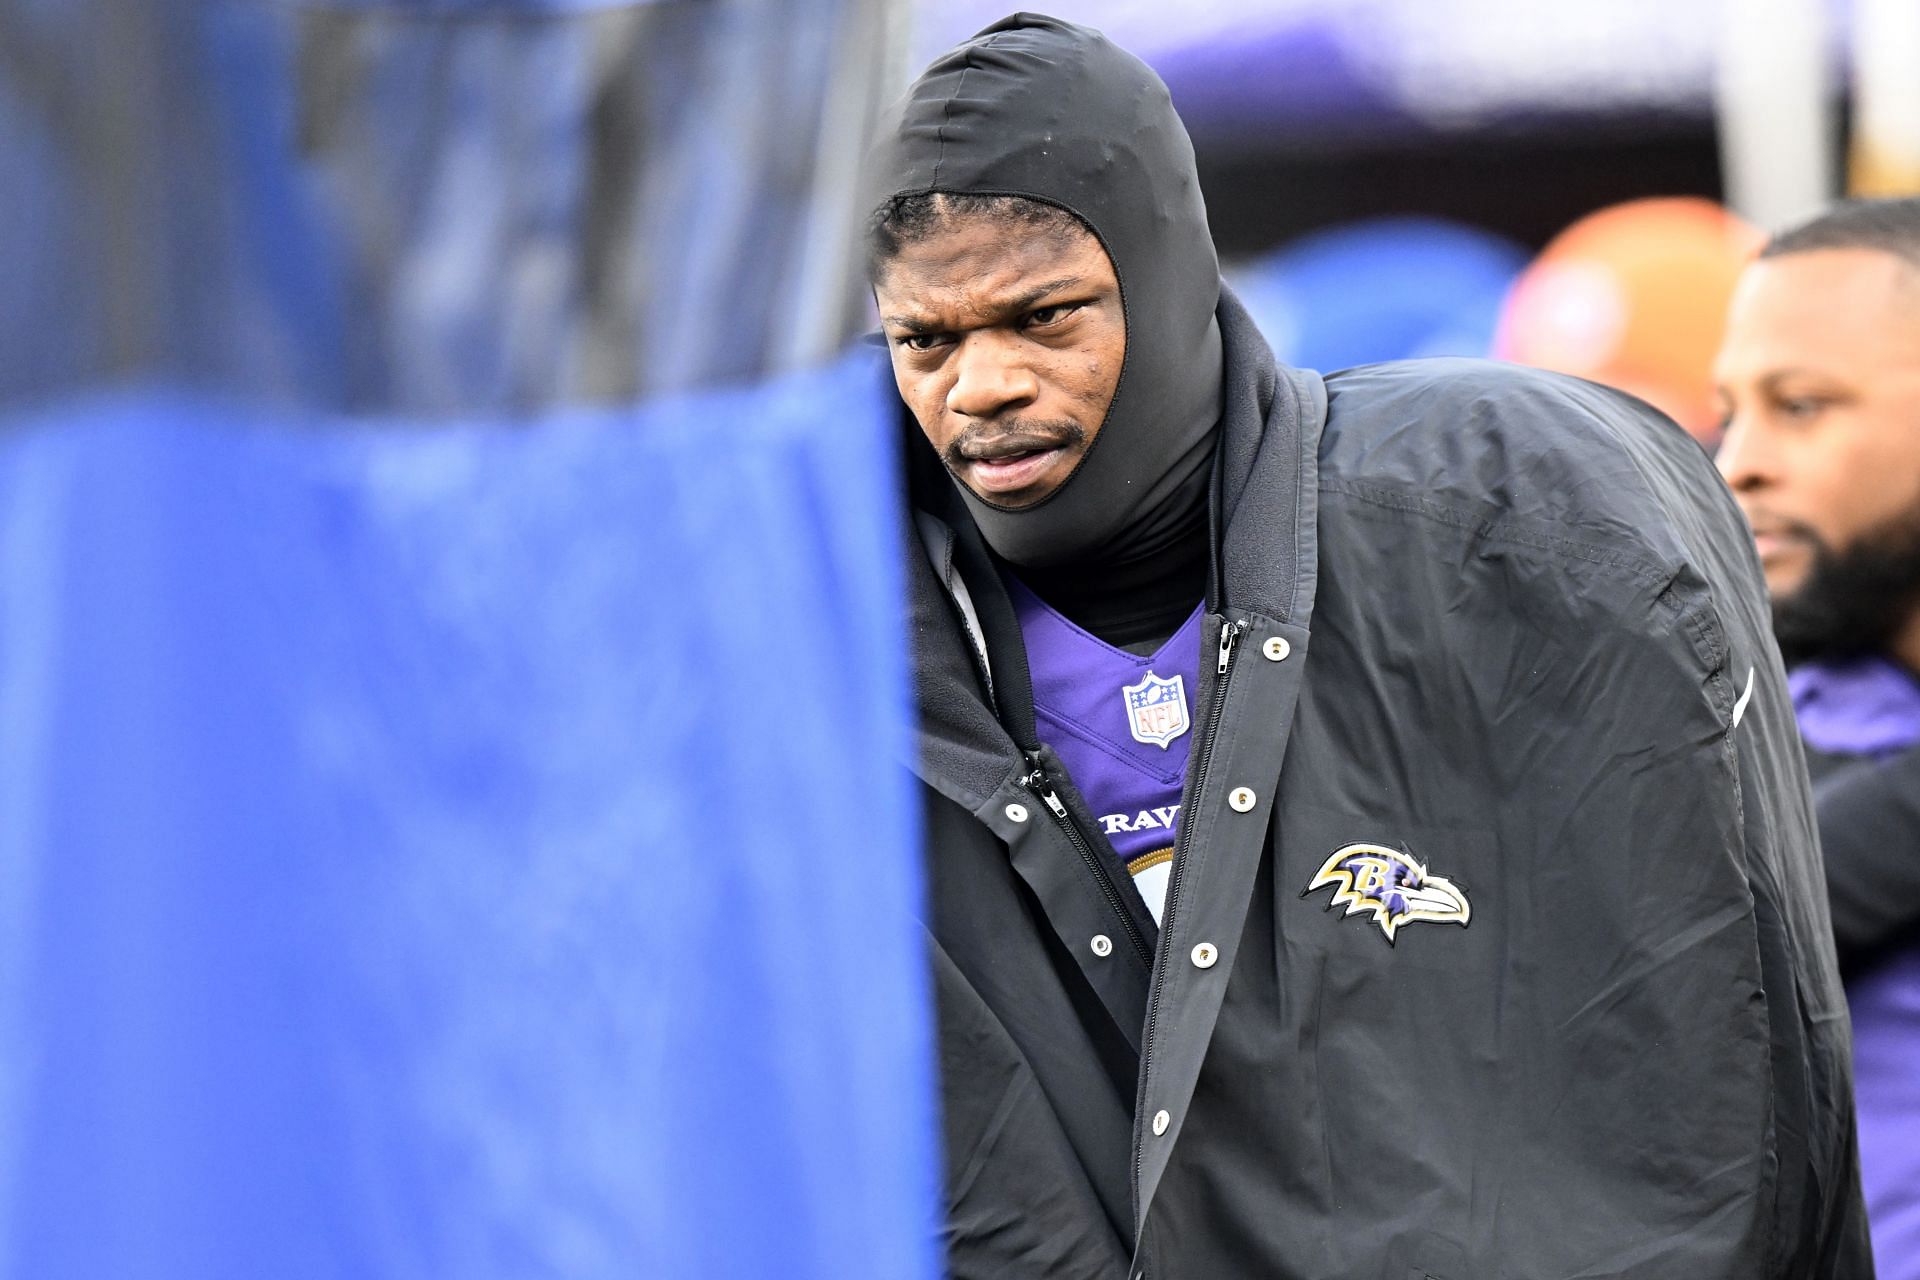 Will the Ravens end up keeping Jackson?